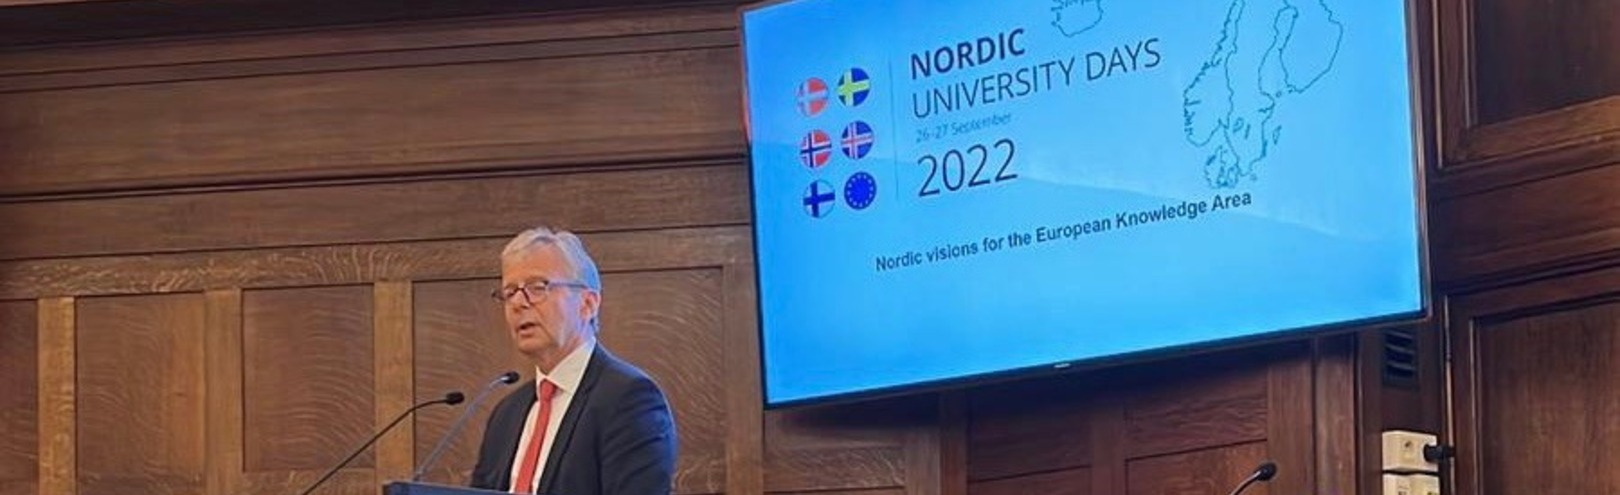 Rector of UI to lead meeting of Nordic university rectors and EU representatives - Available at University of Iceland